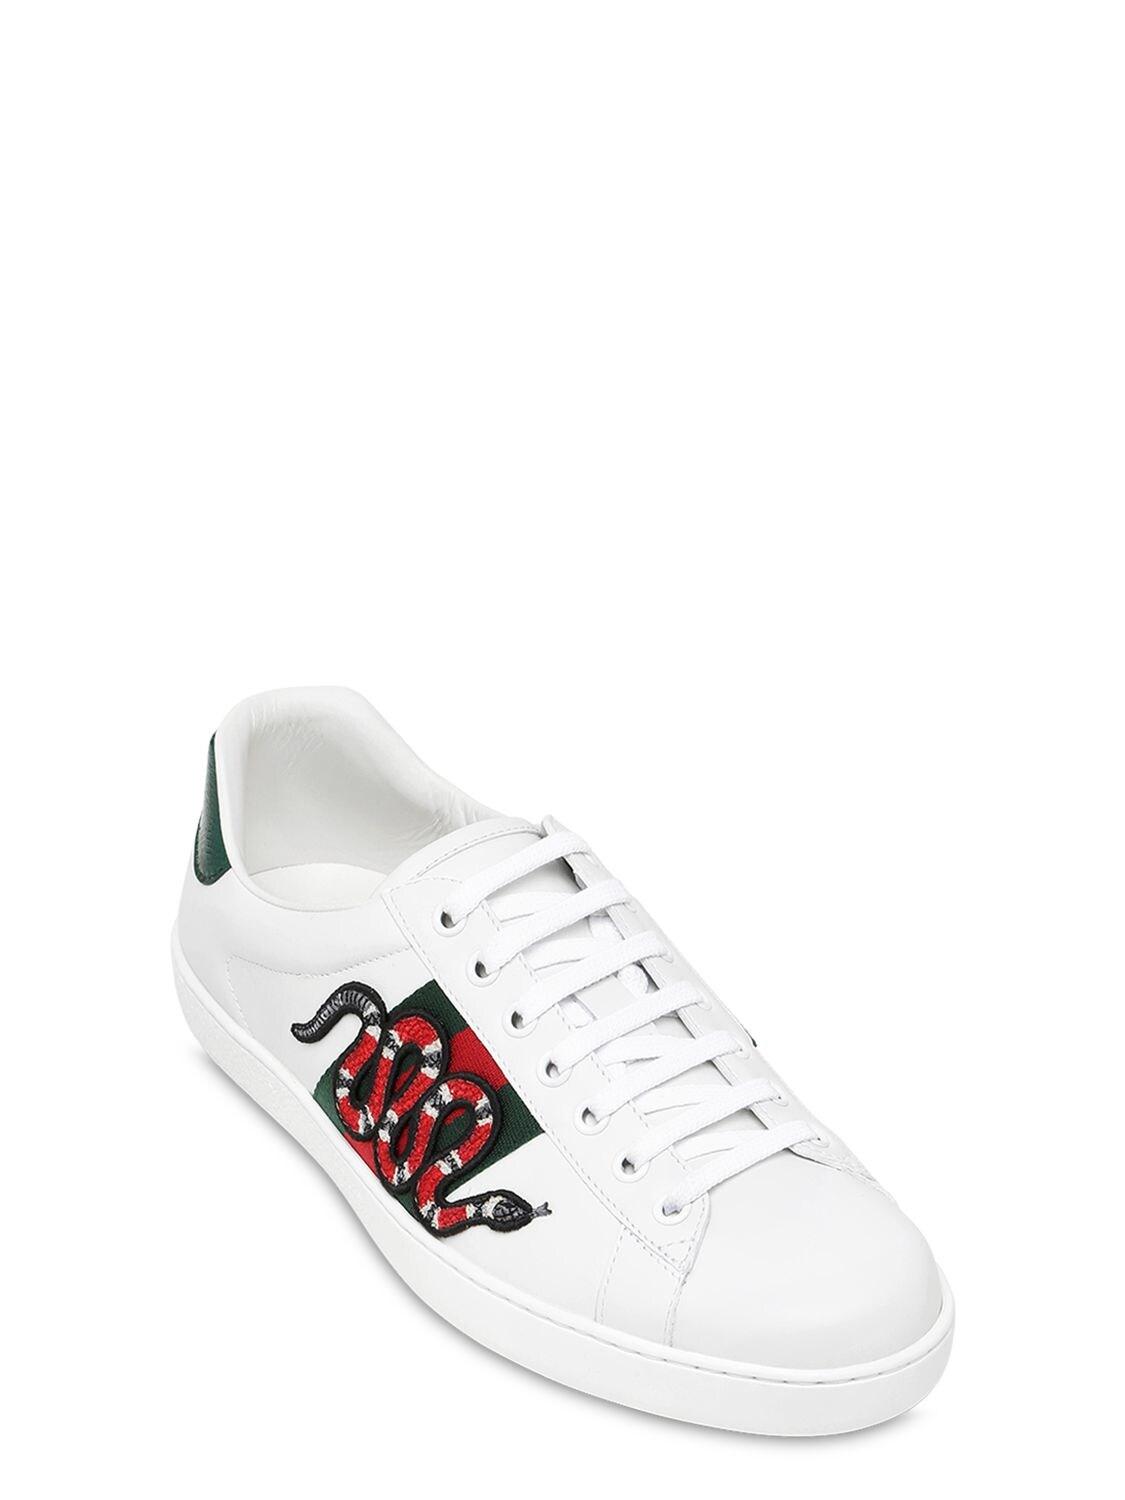 gucci snake tennis shoes